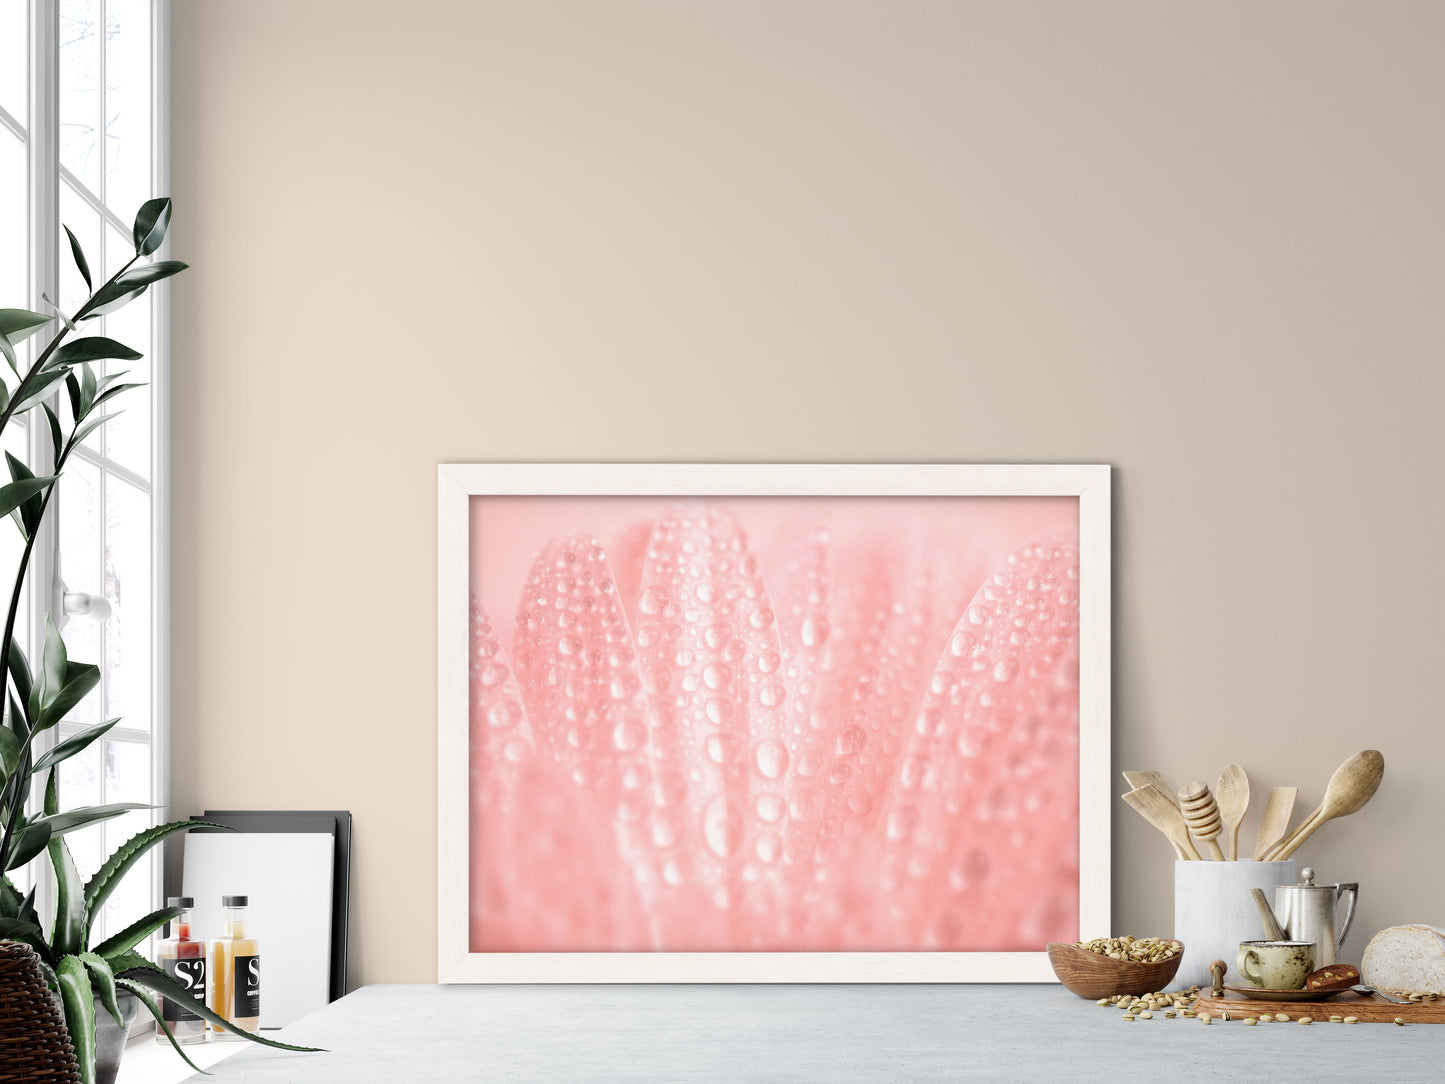 Framed Plant Prints: Close-Up Pink Daisy Floral Botanical Photograph Shabby Chic - Vintage Framed Wall Art Print